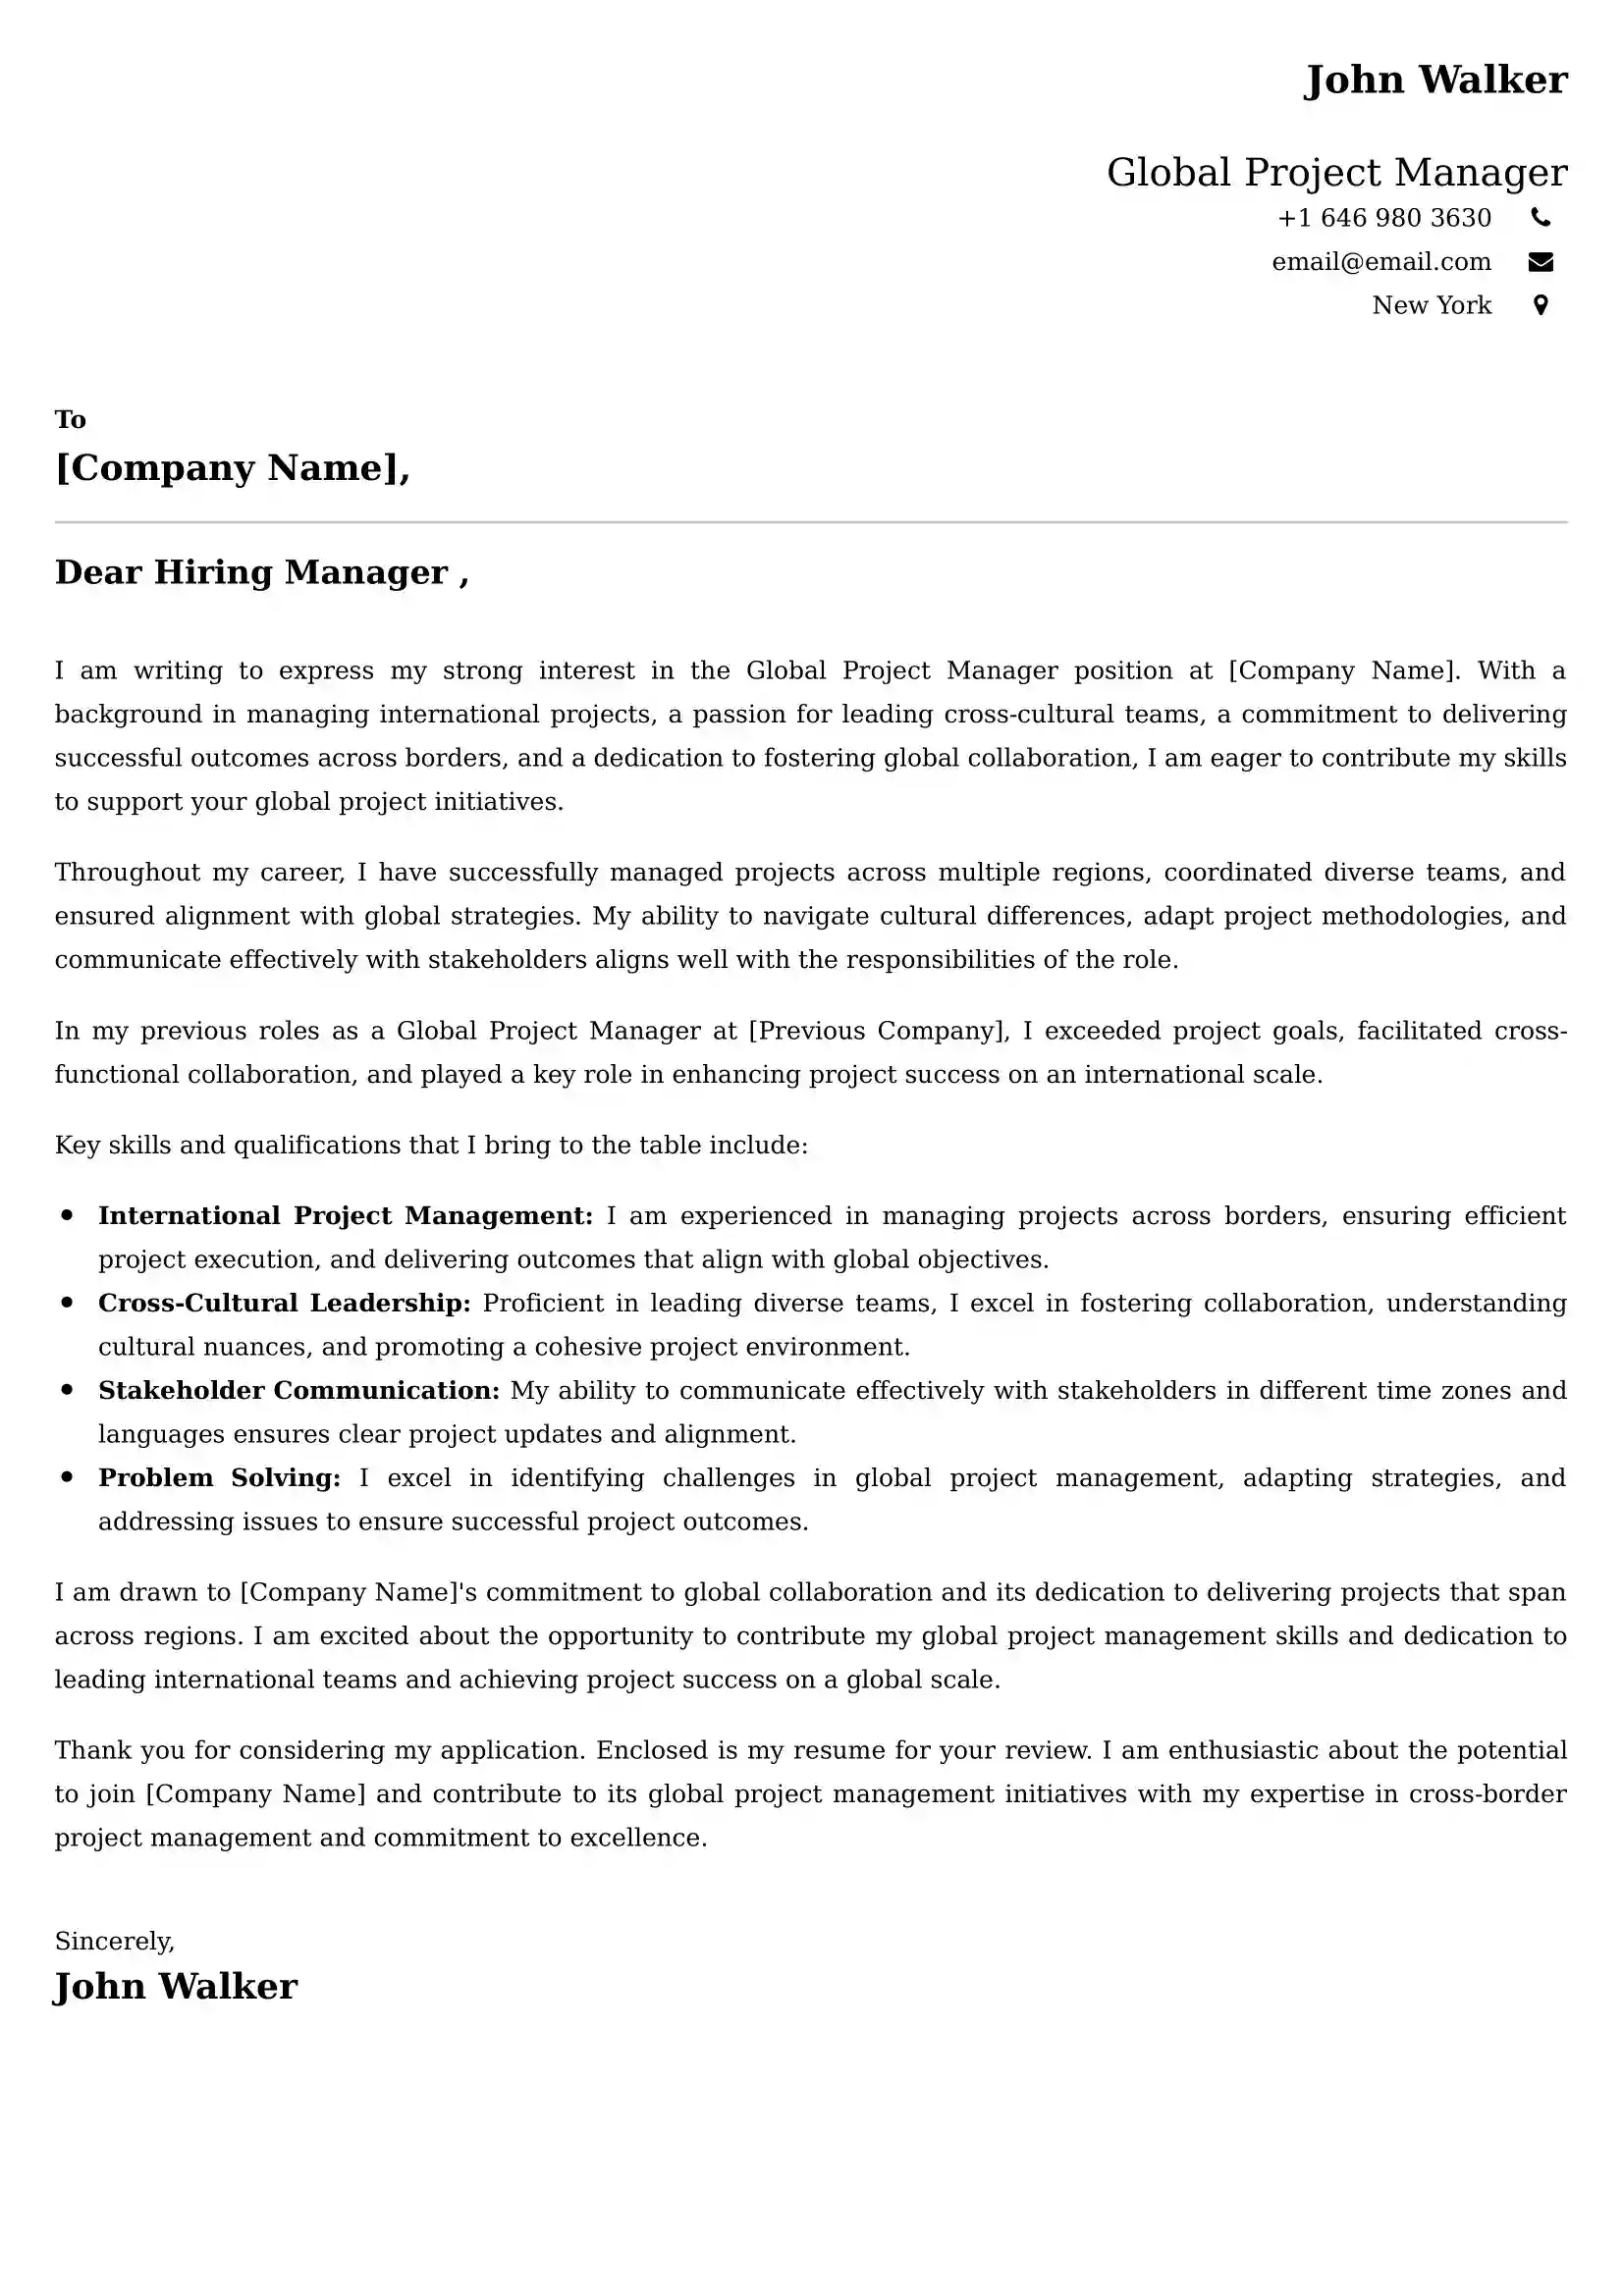 Global Project Manager Cover Letter Sample